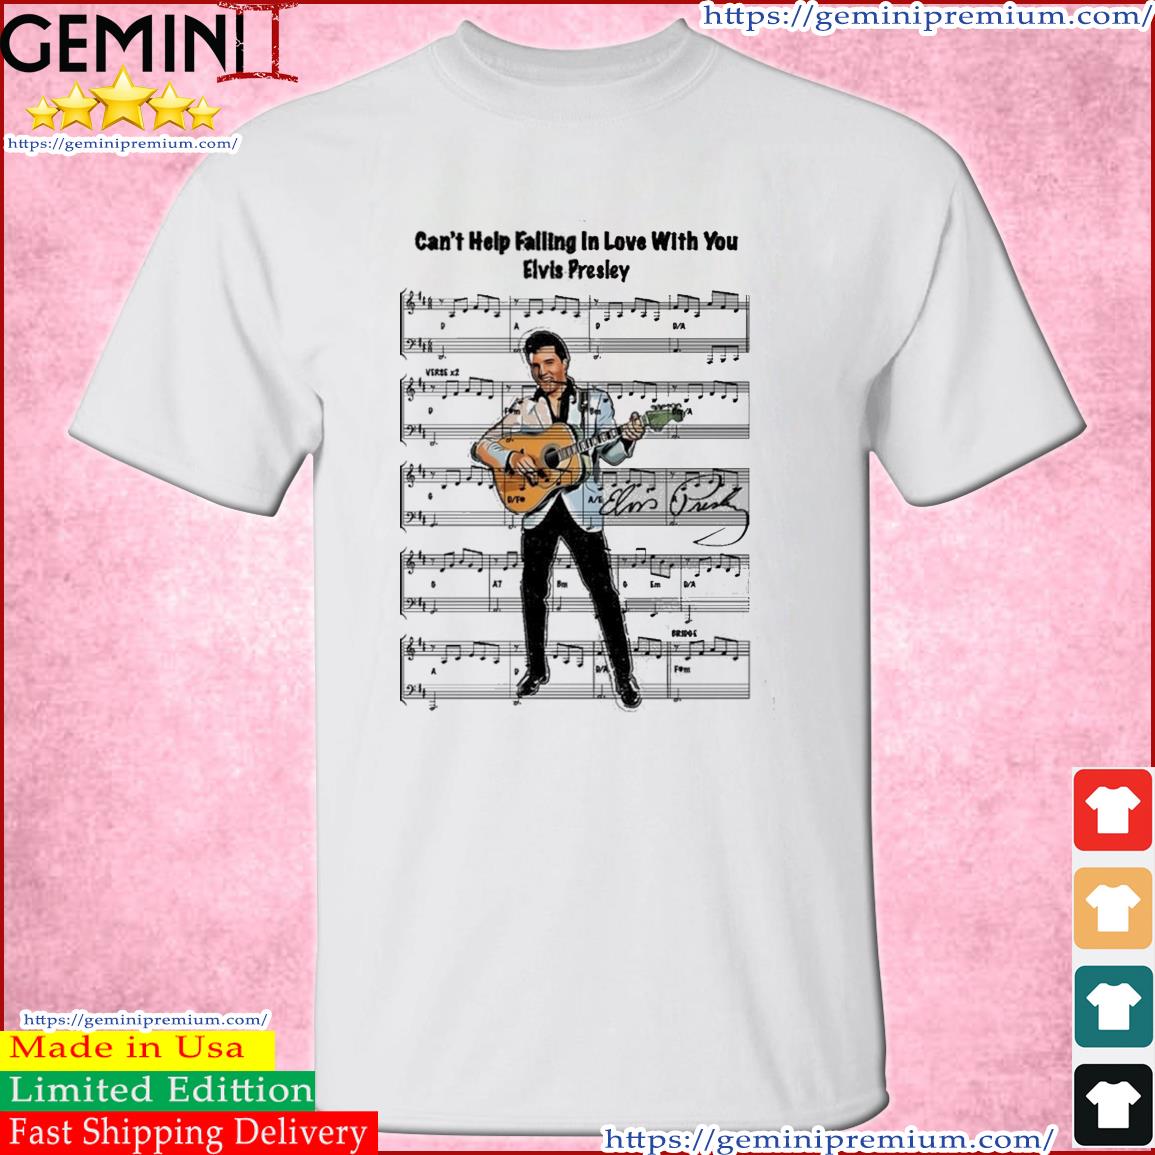 Elvis Presley Can't Help Falling In Love With You Song Lyrics Shirt